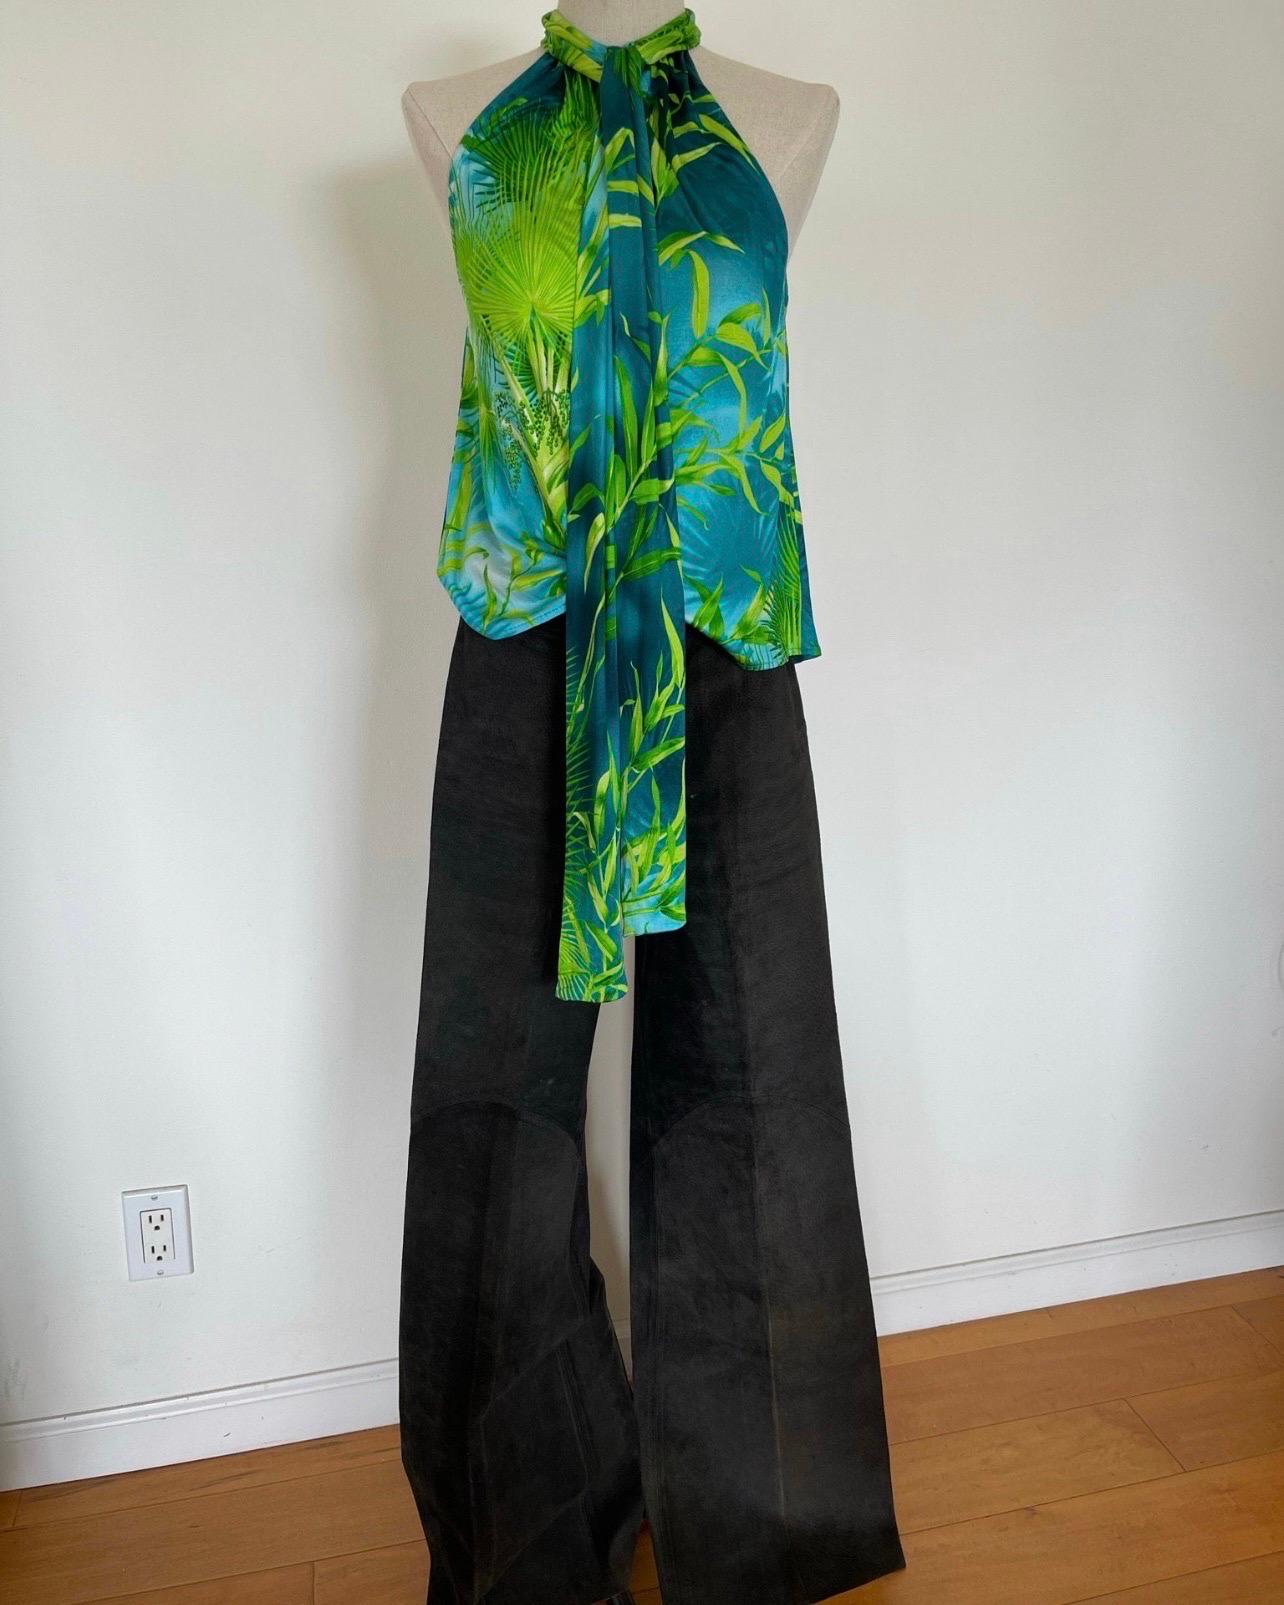 Vintage Gianni Versace Jungle Print Versace Halter Top from S/S 2000 In Excellent Condition For Sale In Malibu, CA